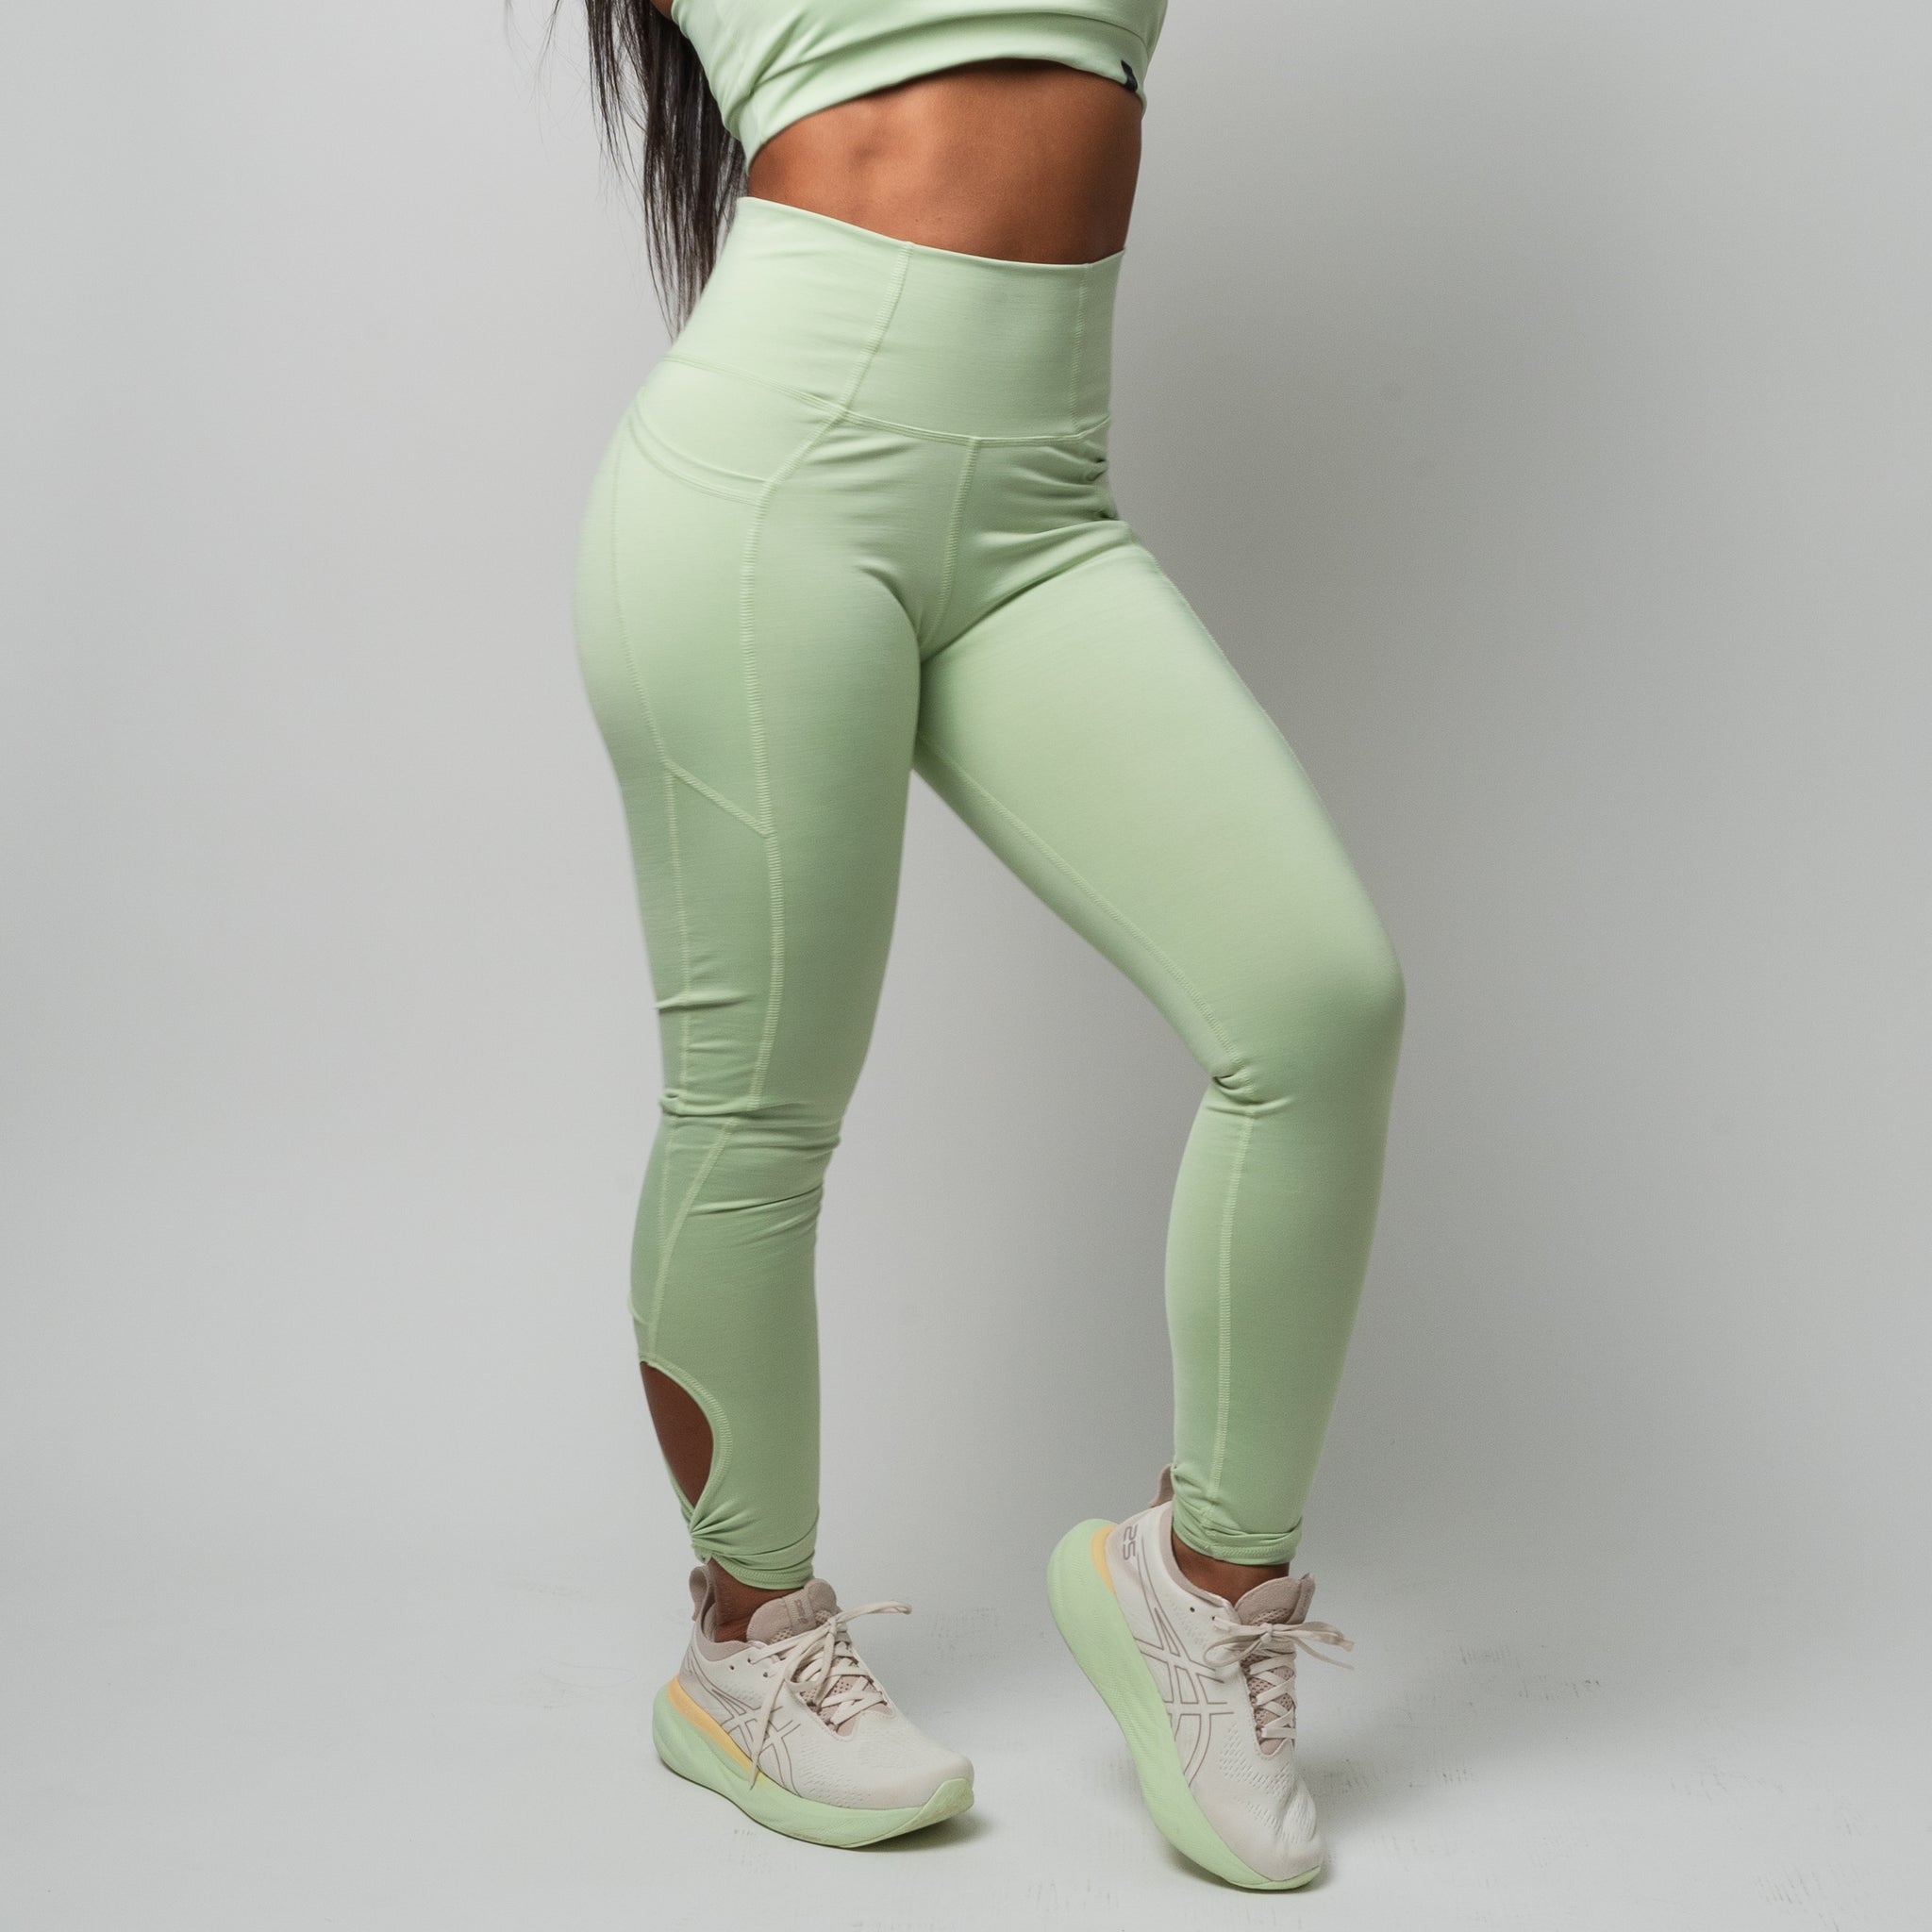 Twisted cut-out legging  Pastel green. – Up10 activewear